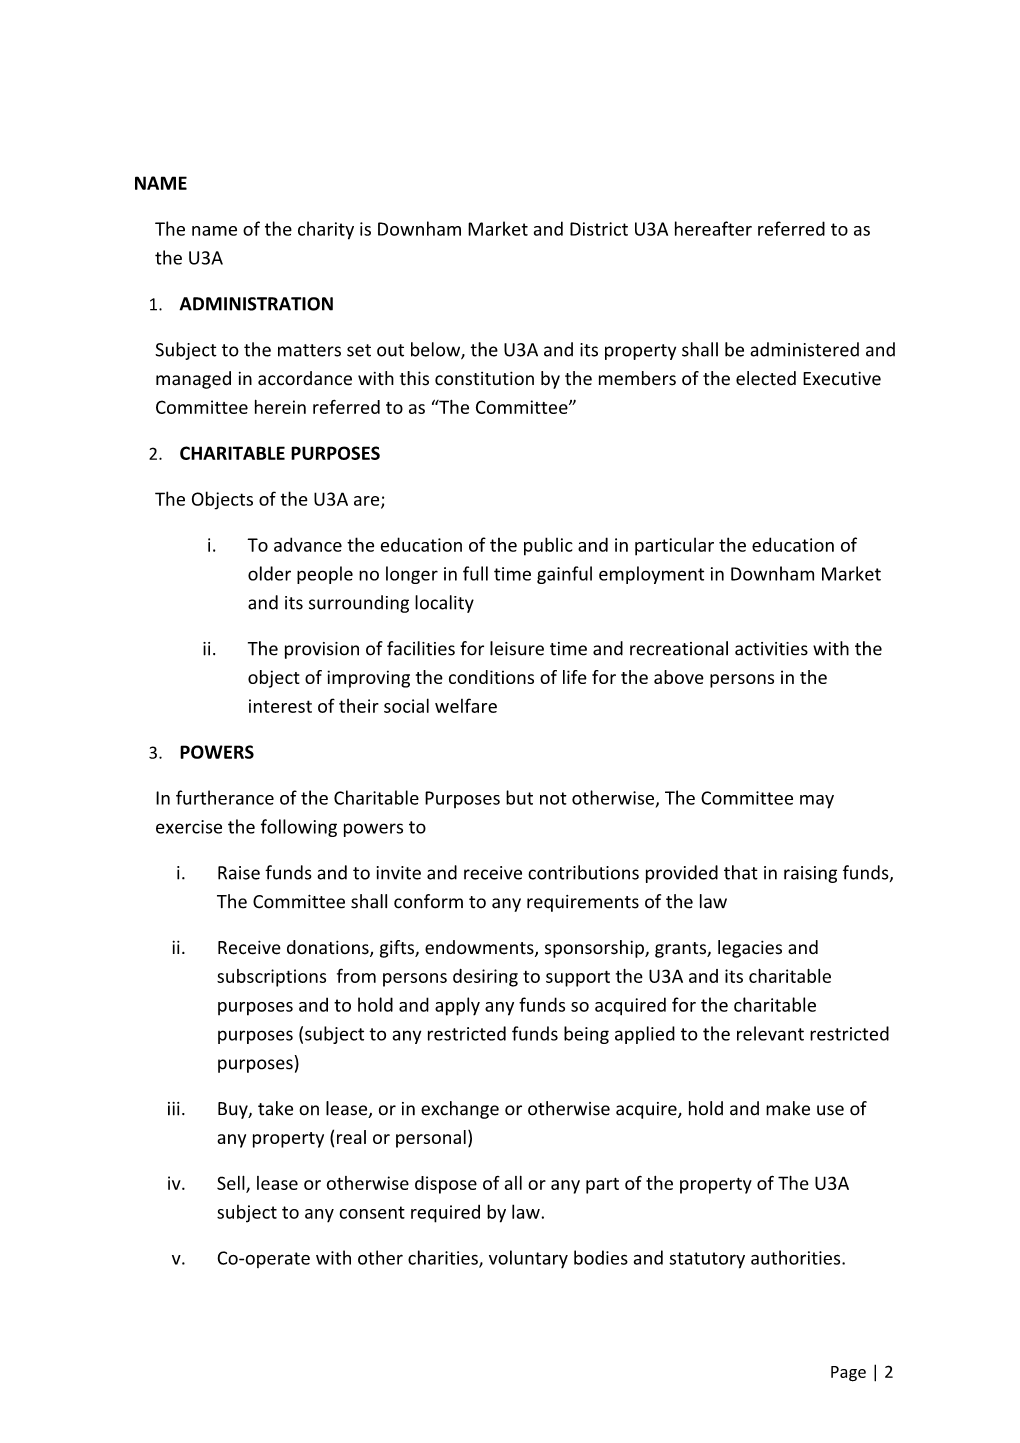 Constitution of the Downham Market and District